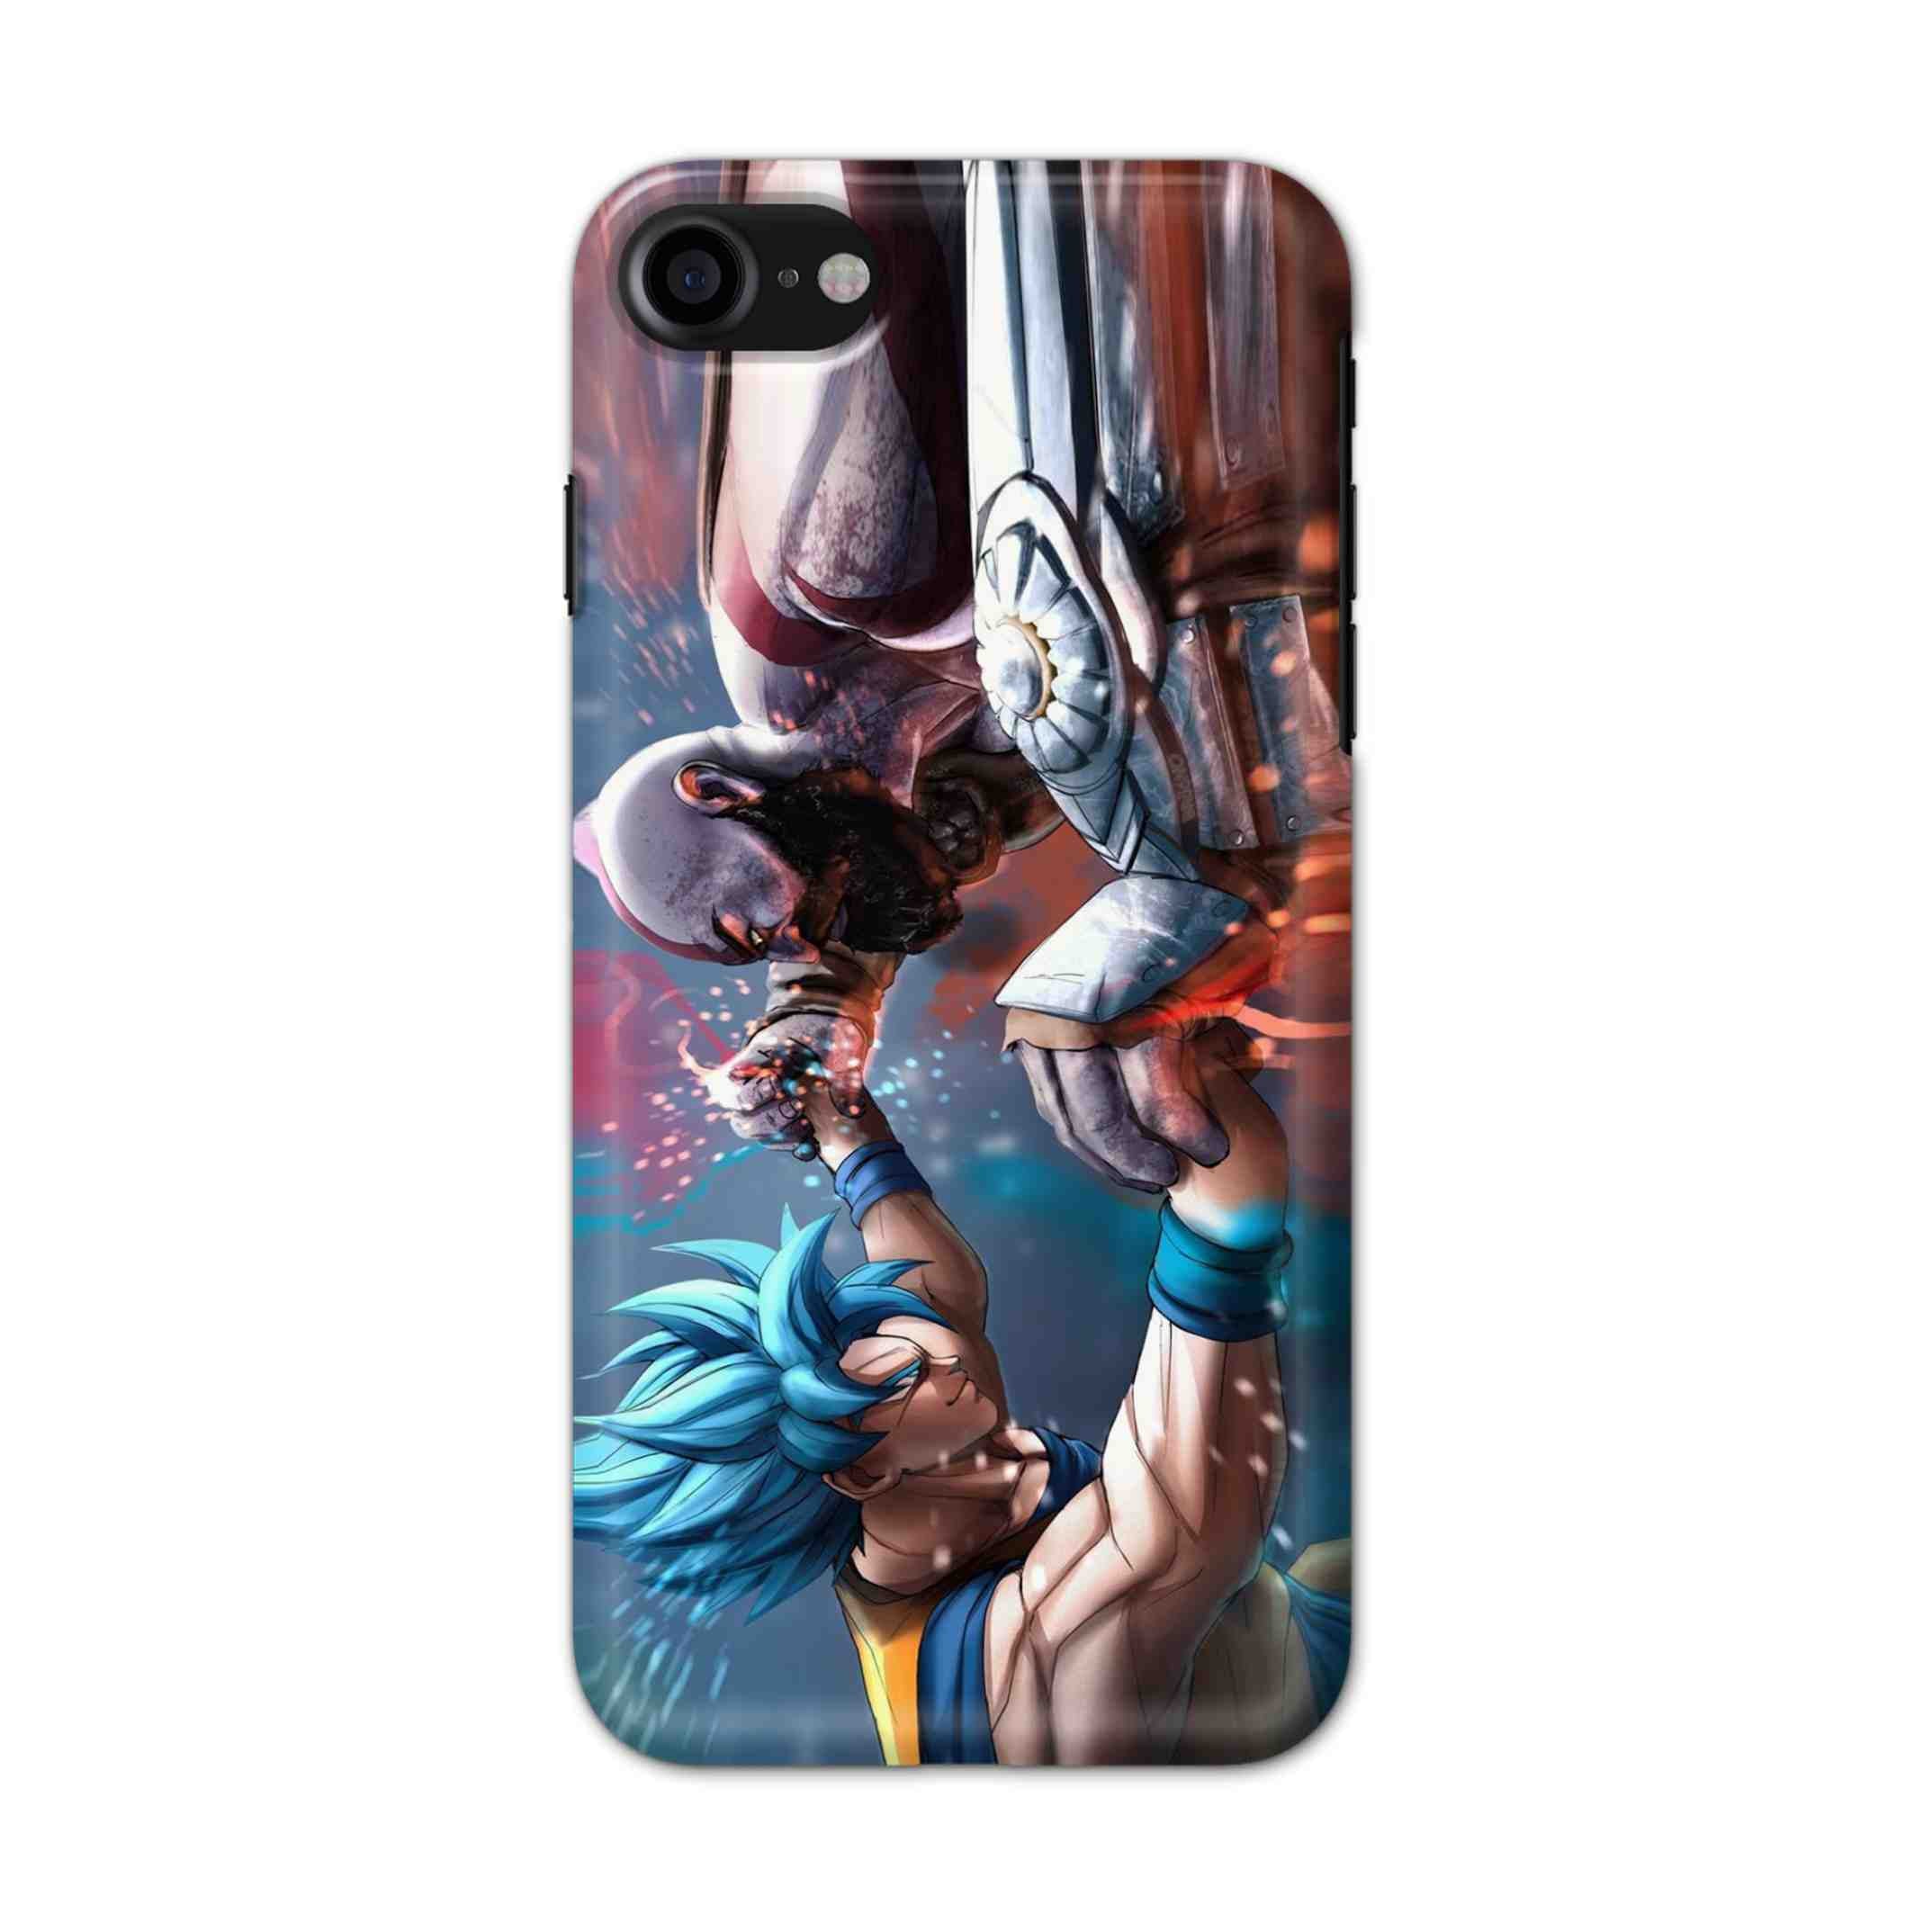 Buy Goku Vs Kratos Hard Back Mobile Phone Case/Cover For iPhone 7 / 8 Online